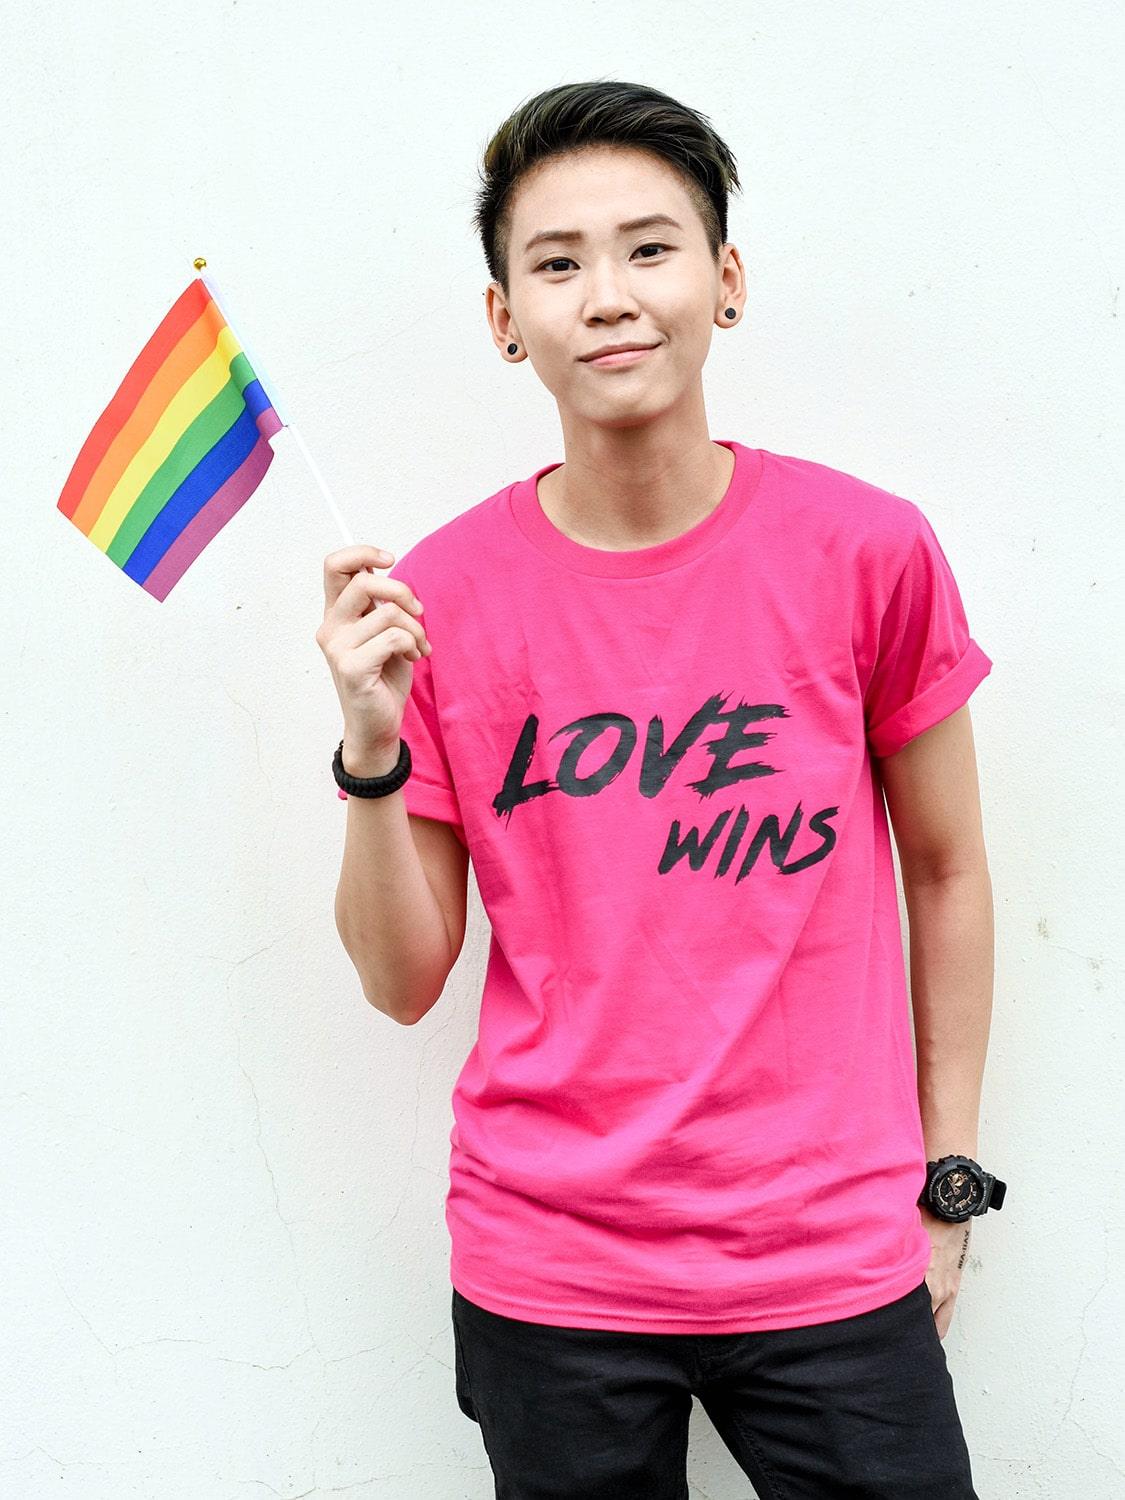 Captivating image of an Asian tomboy with a clean haircut, sporting a hot pink 'Love Wins' t-shirt and proudly holding a pride flag. Explore the TOMSCOUT Flourish - LGBT Pride Kits for a bold expression of pride in Singapore.